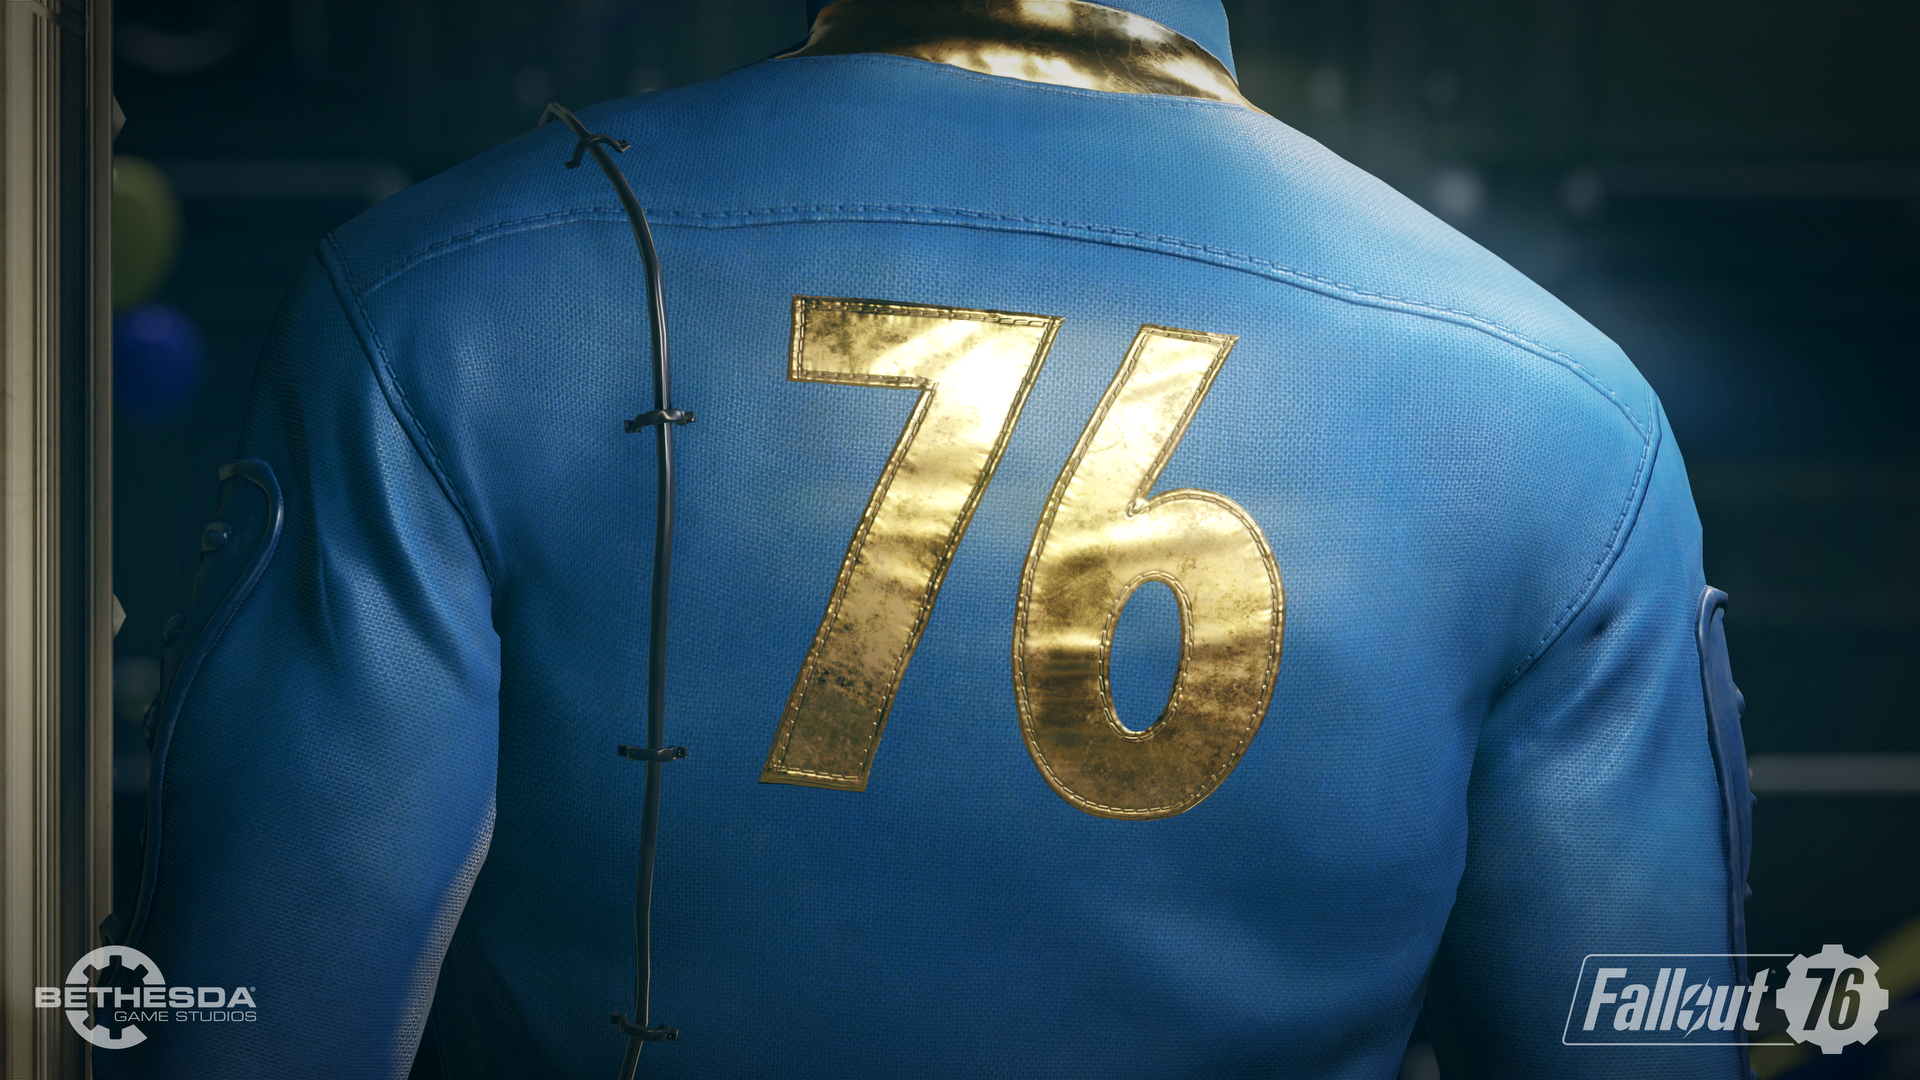 Fallout 76 Hands-on